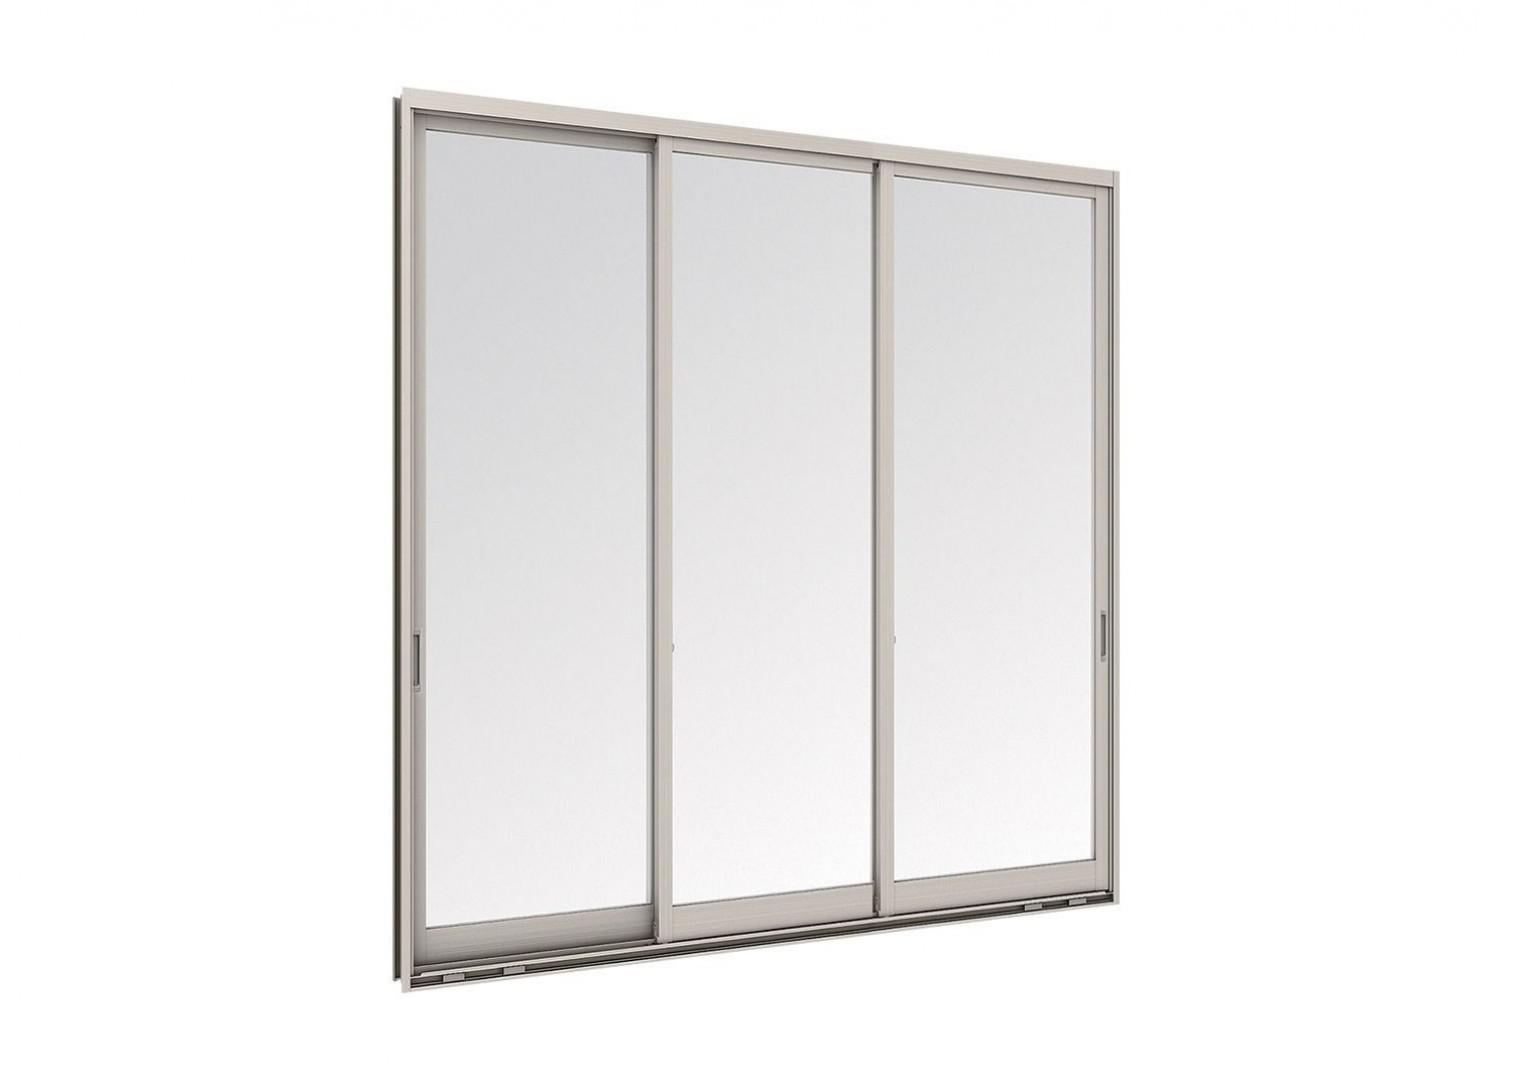 VIEW AND VIEW PLUS - Sliding Door 3 Panels on 3 Tracks from TOSTEM